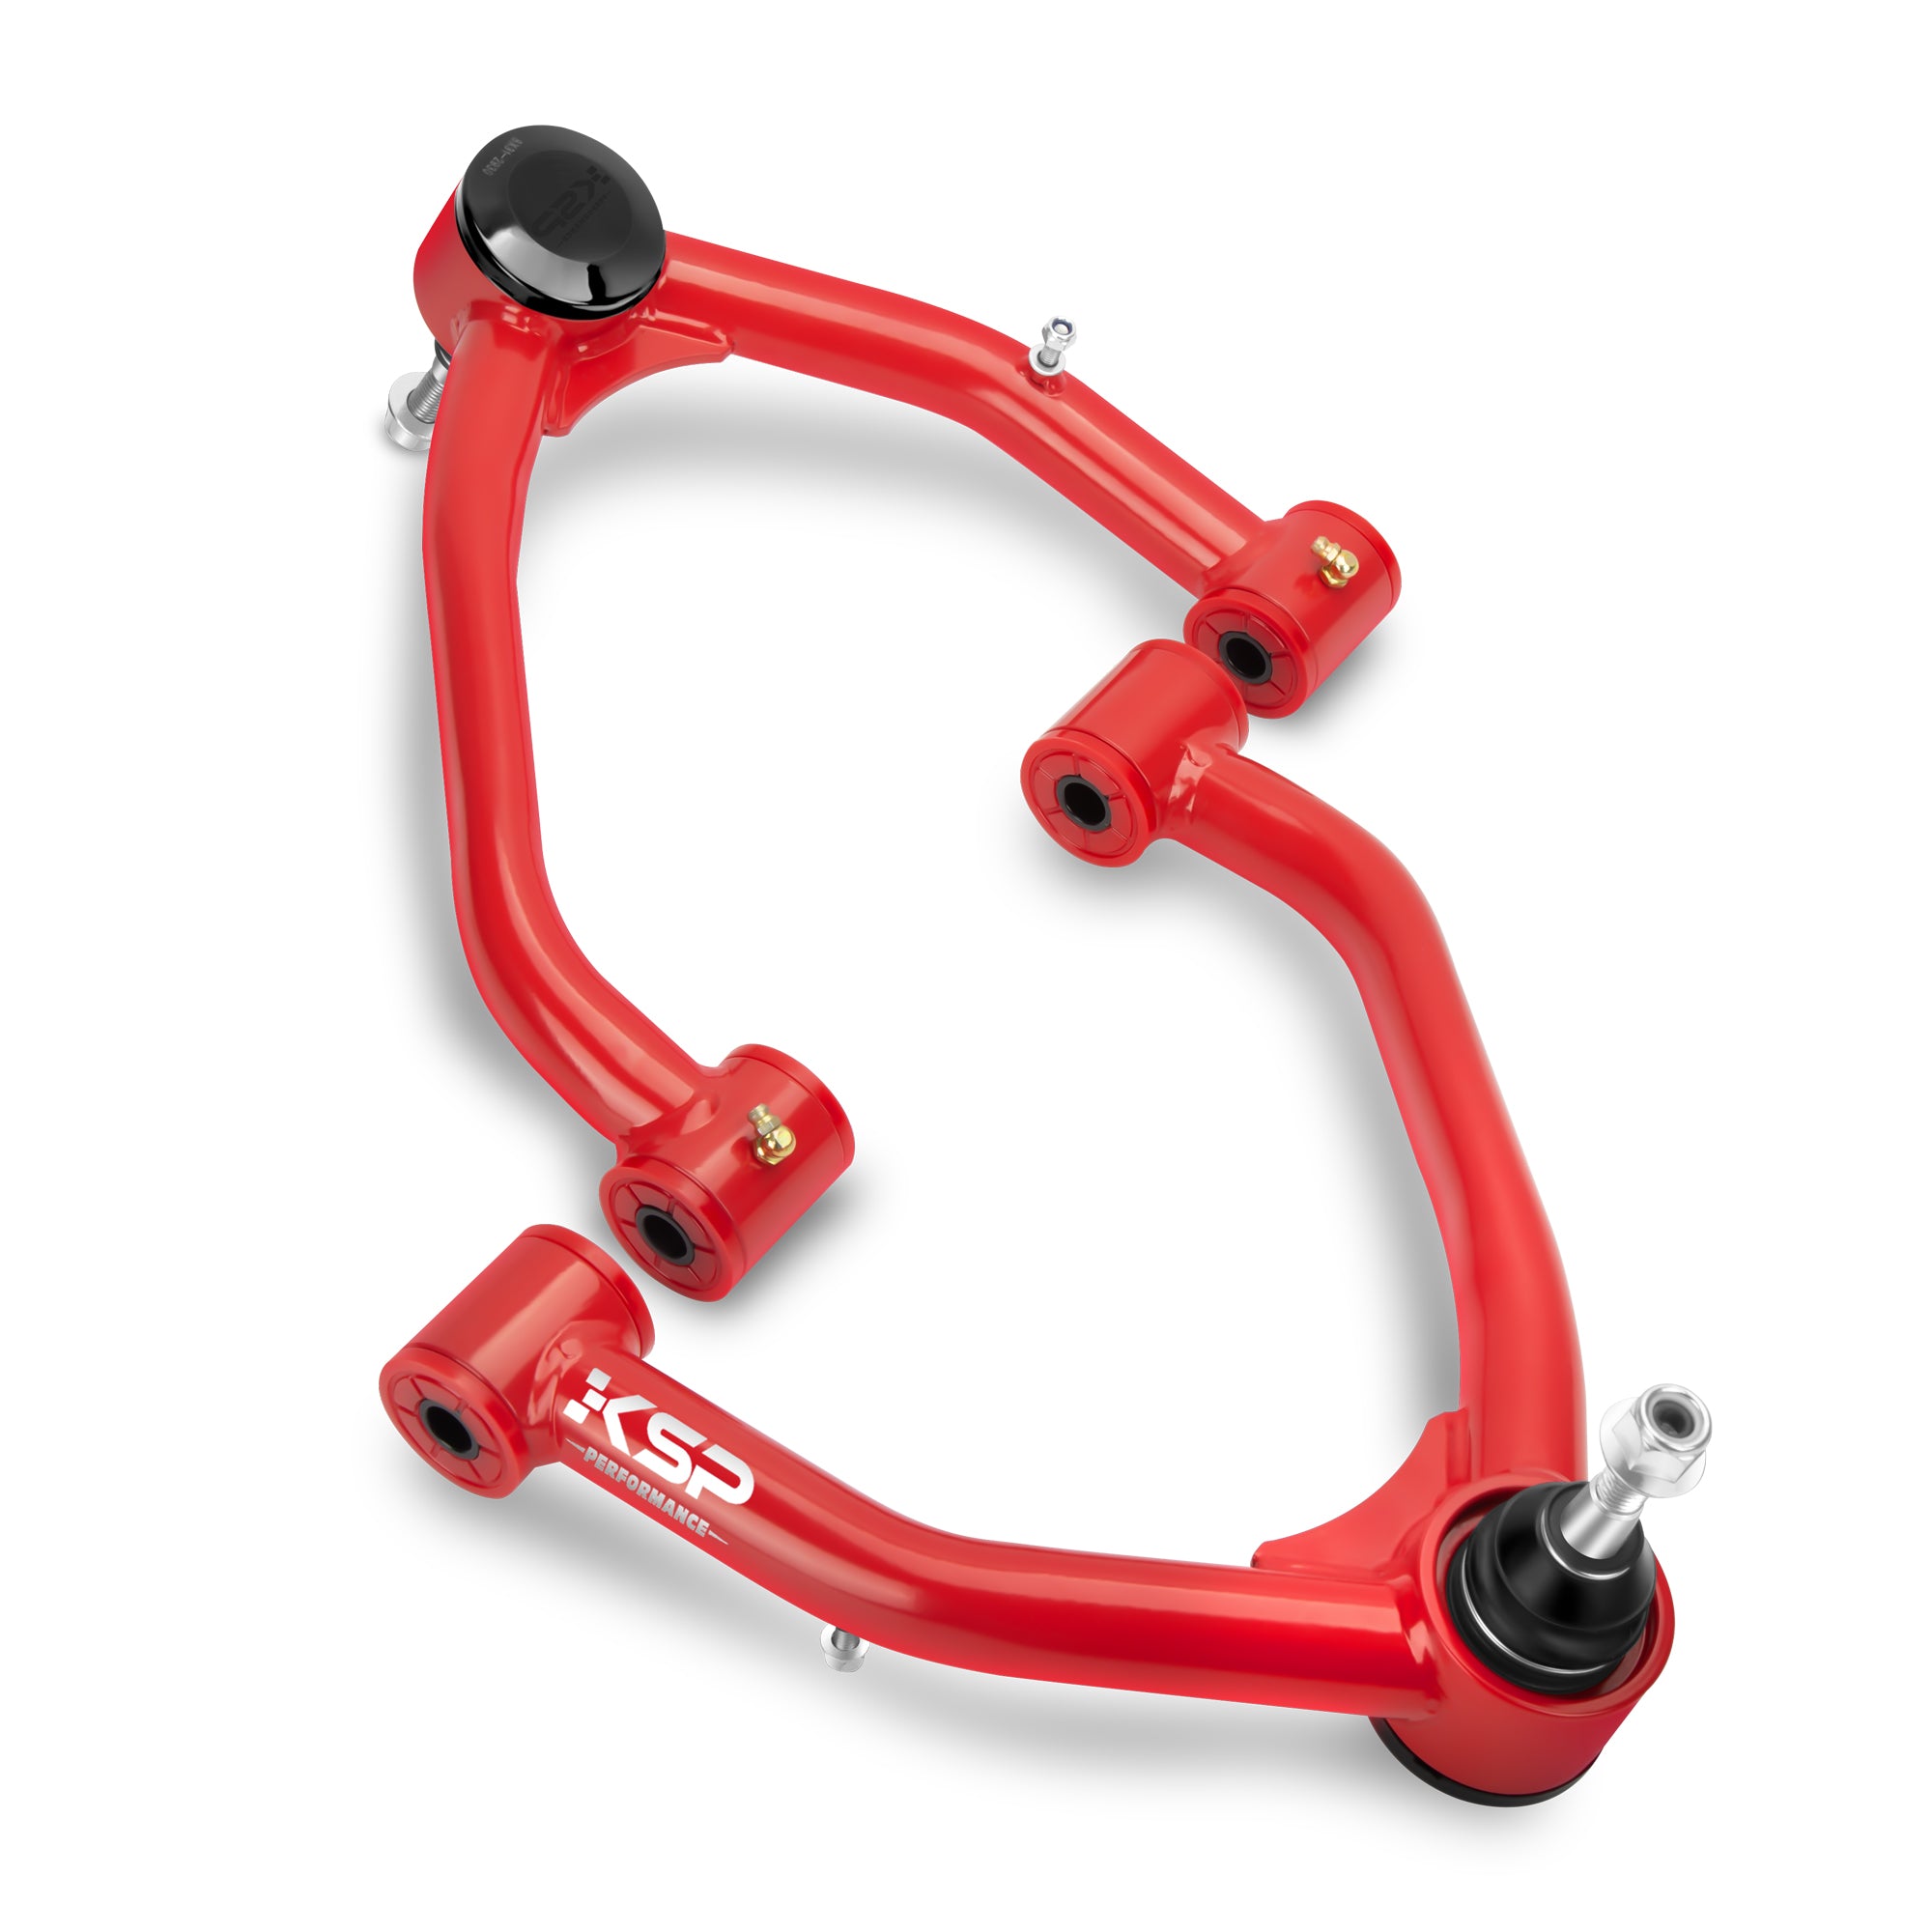 KSP OE Upgrade Front Upper Control Arms For 2007-2018 Silverado Sierra 0-2 Inch Lift Chevy GMC Red UCAs